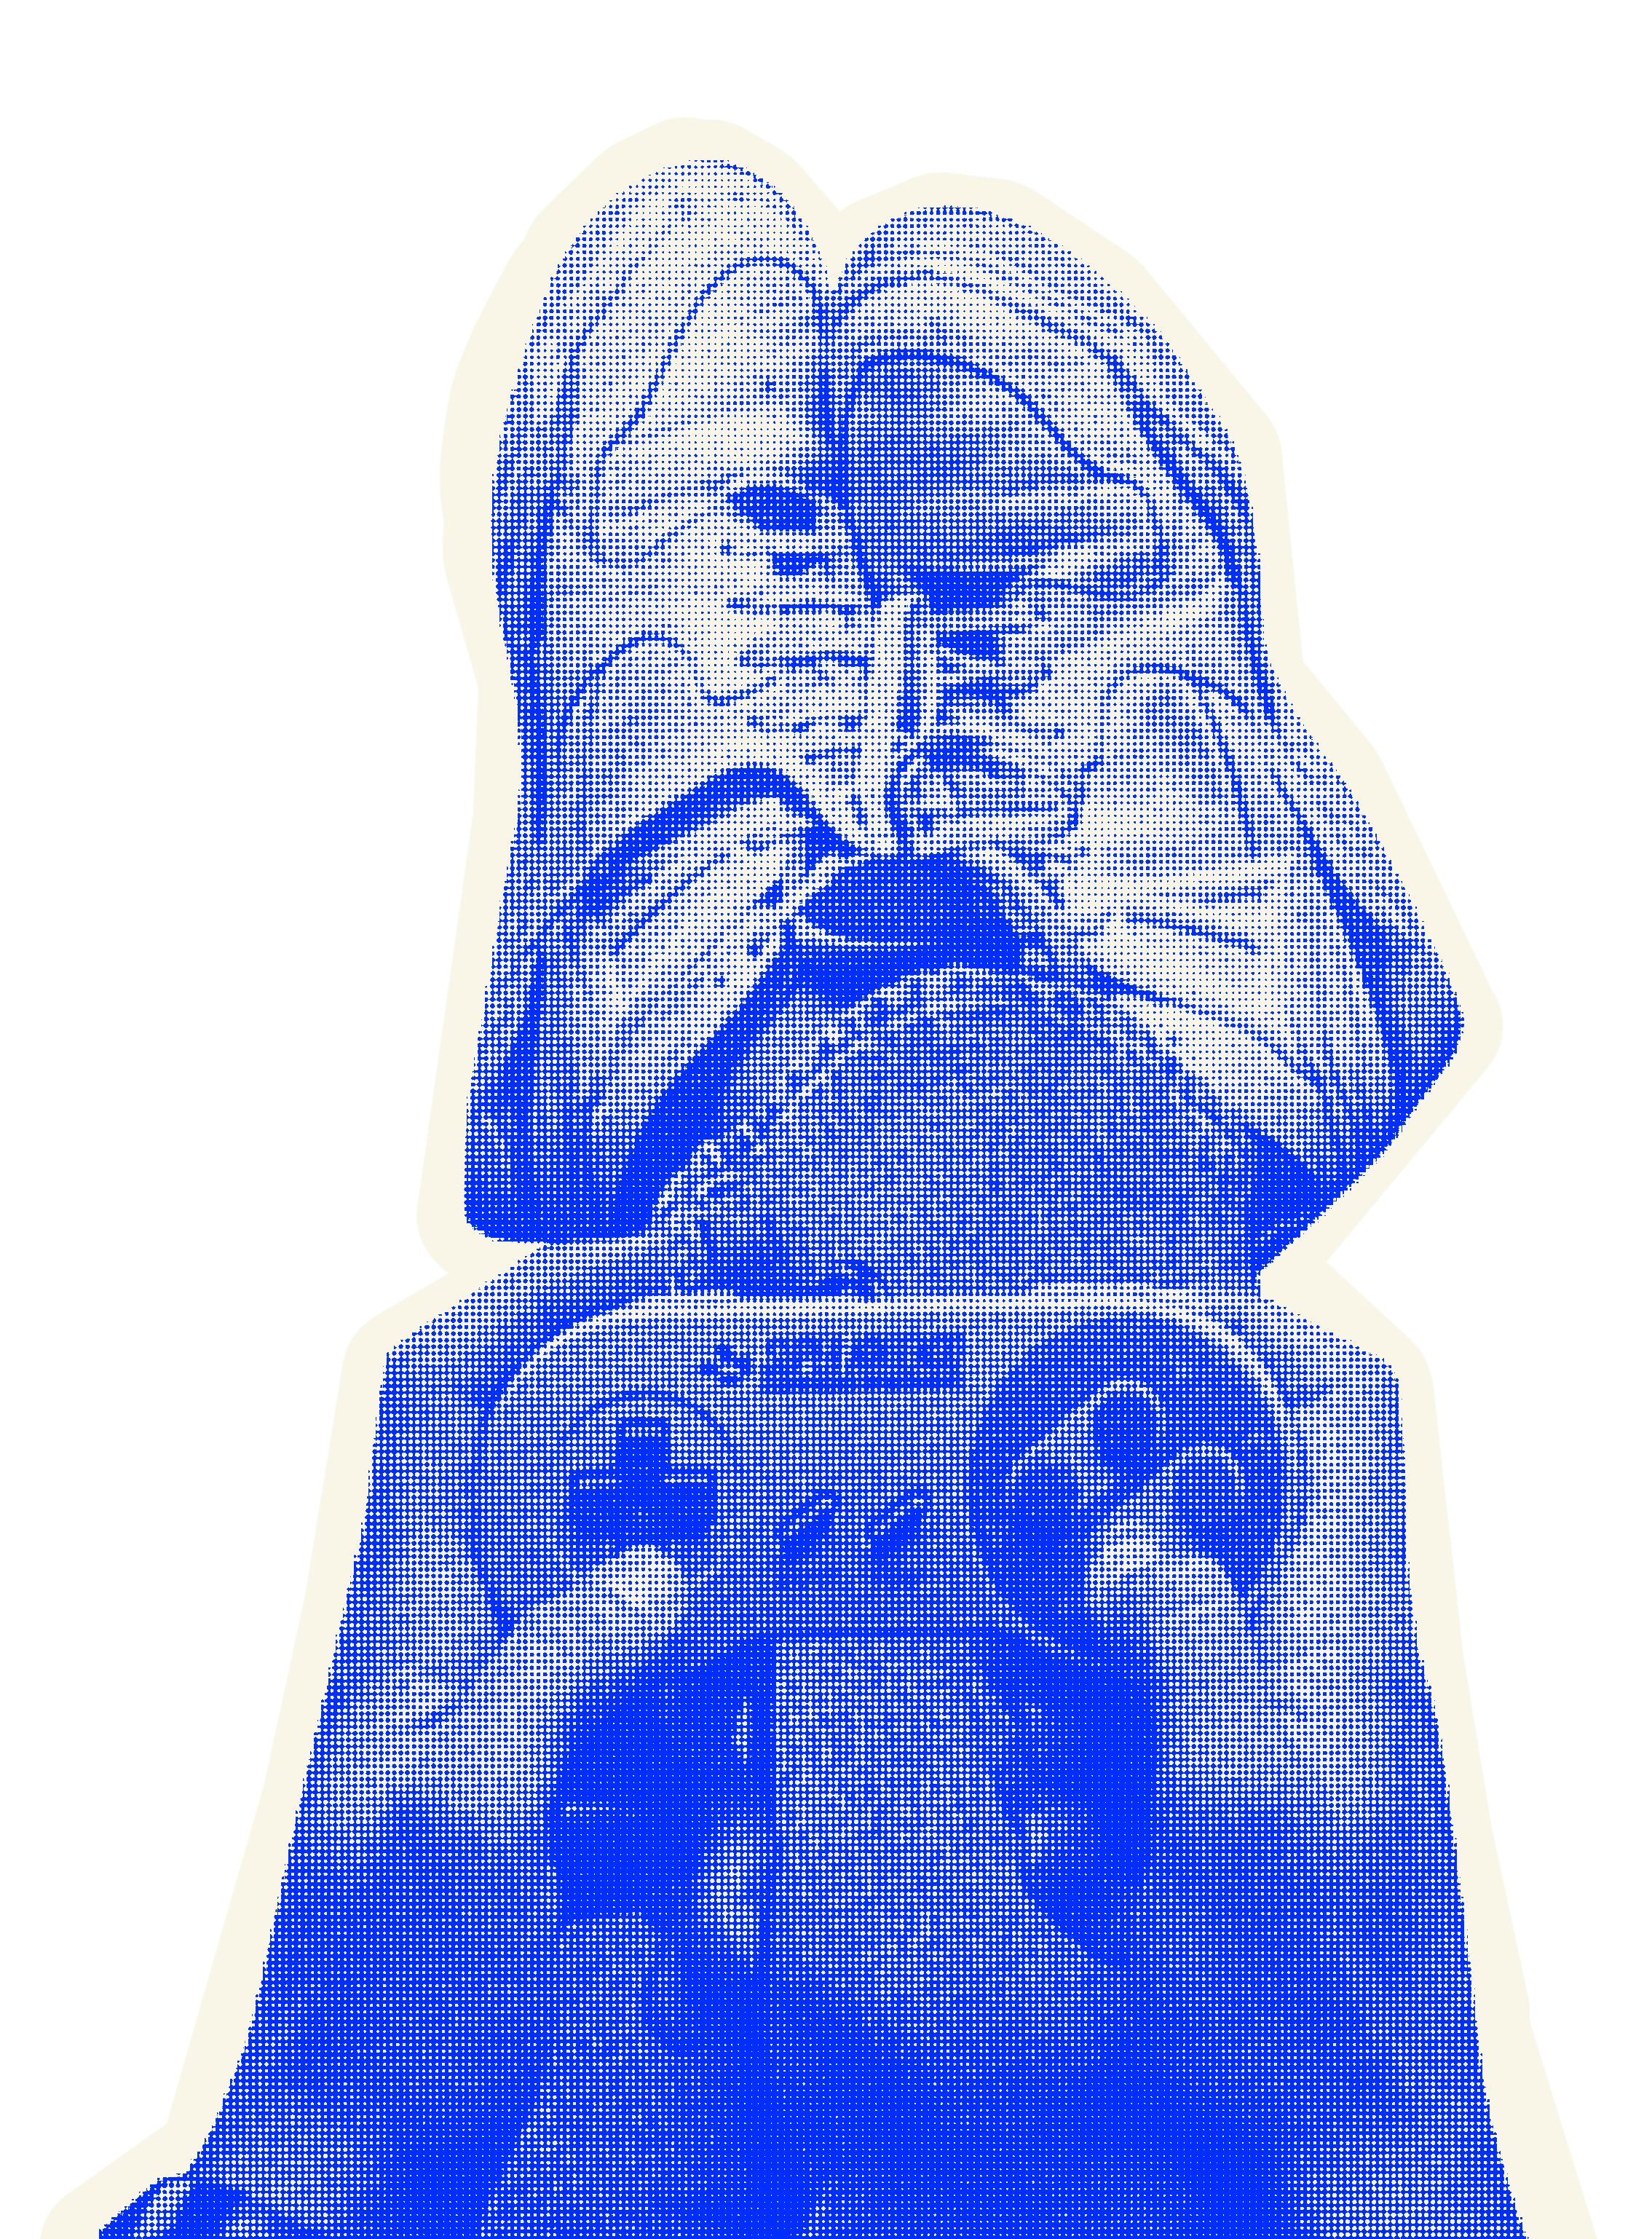 A person playing a video game using a Super Nintendo controller. Softserve Digital Development understands the power of play and gamification.